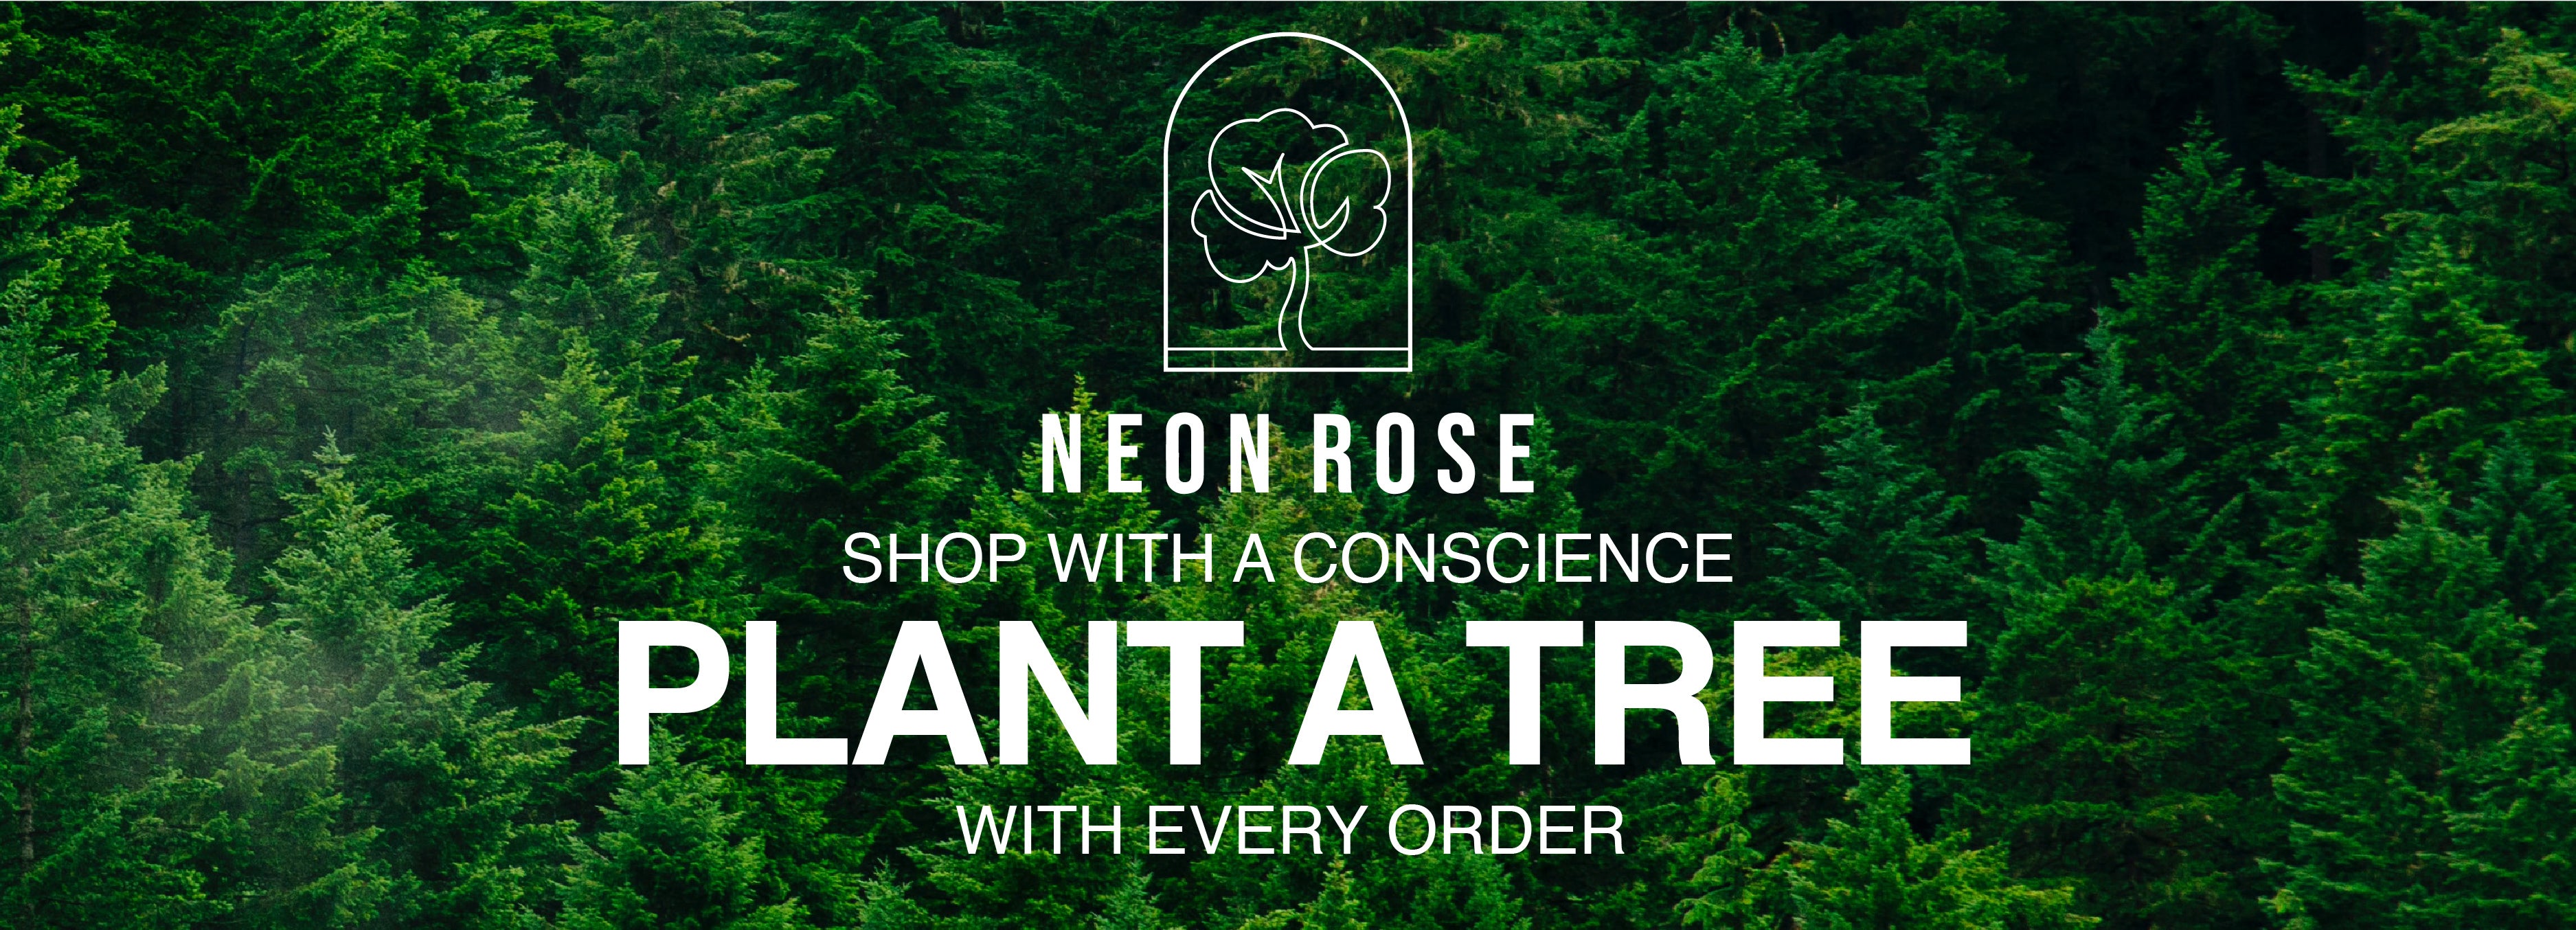 Neon Rose Store  Plant A Tree With Every Order